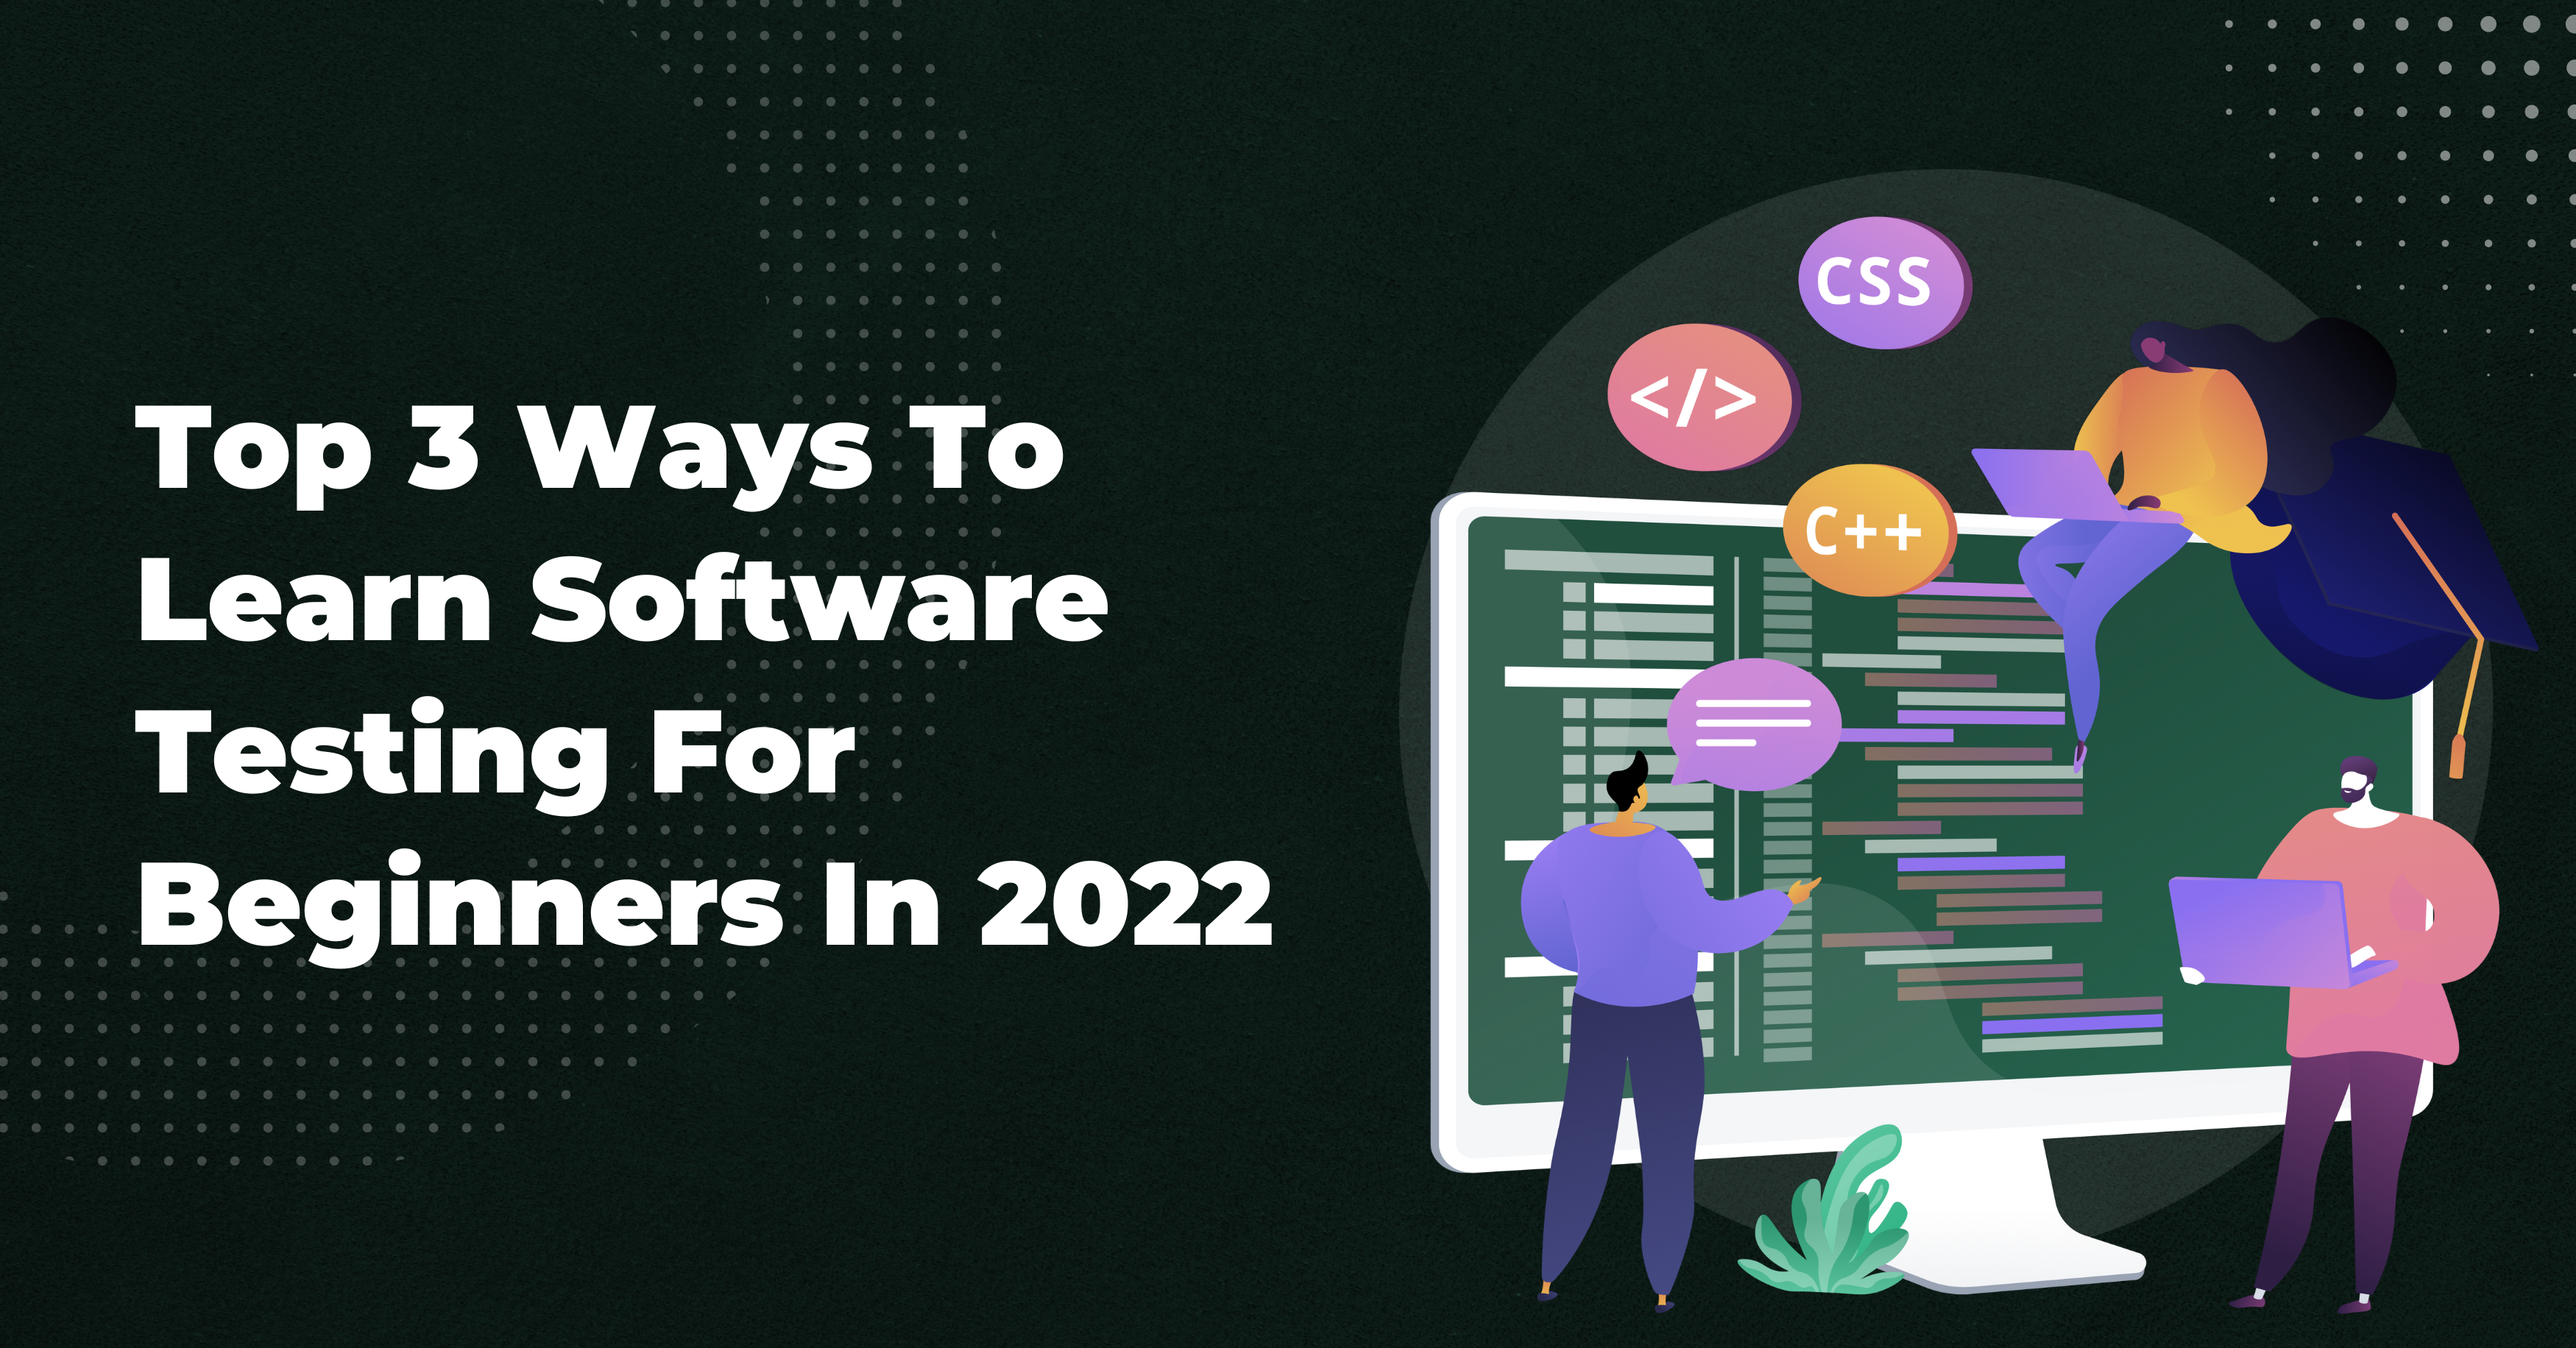 Top 3 Ways To Learn Software Testing For Beginners In 2022